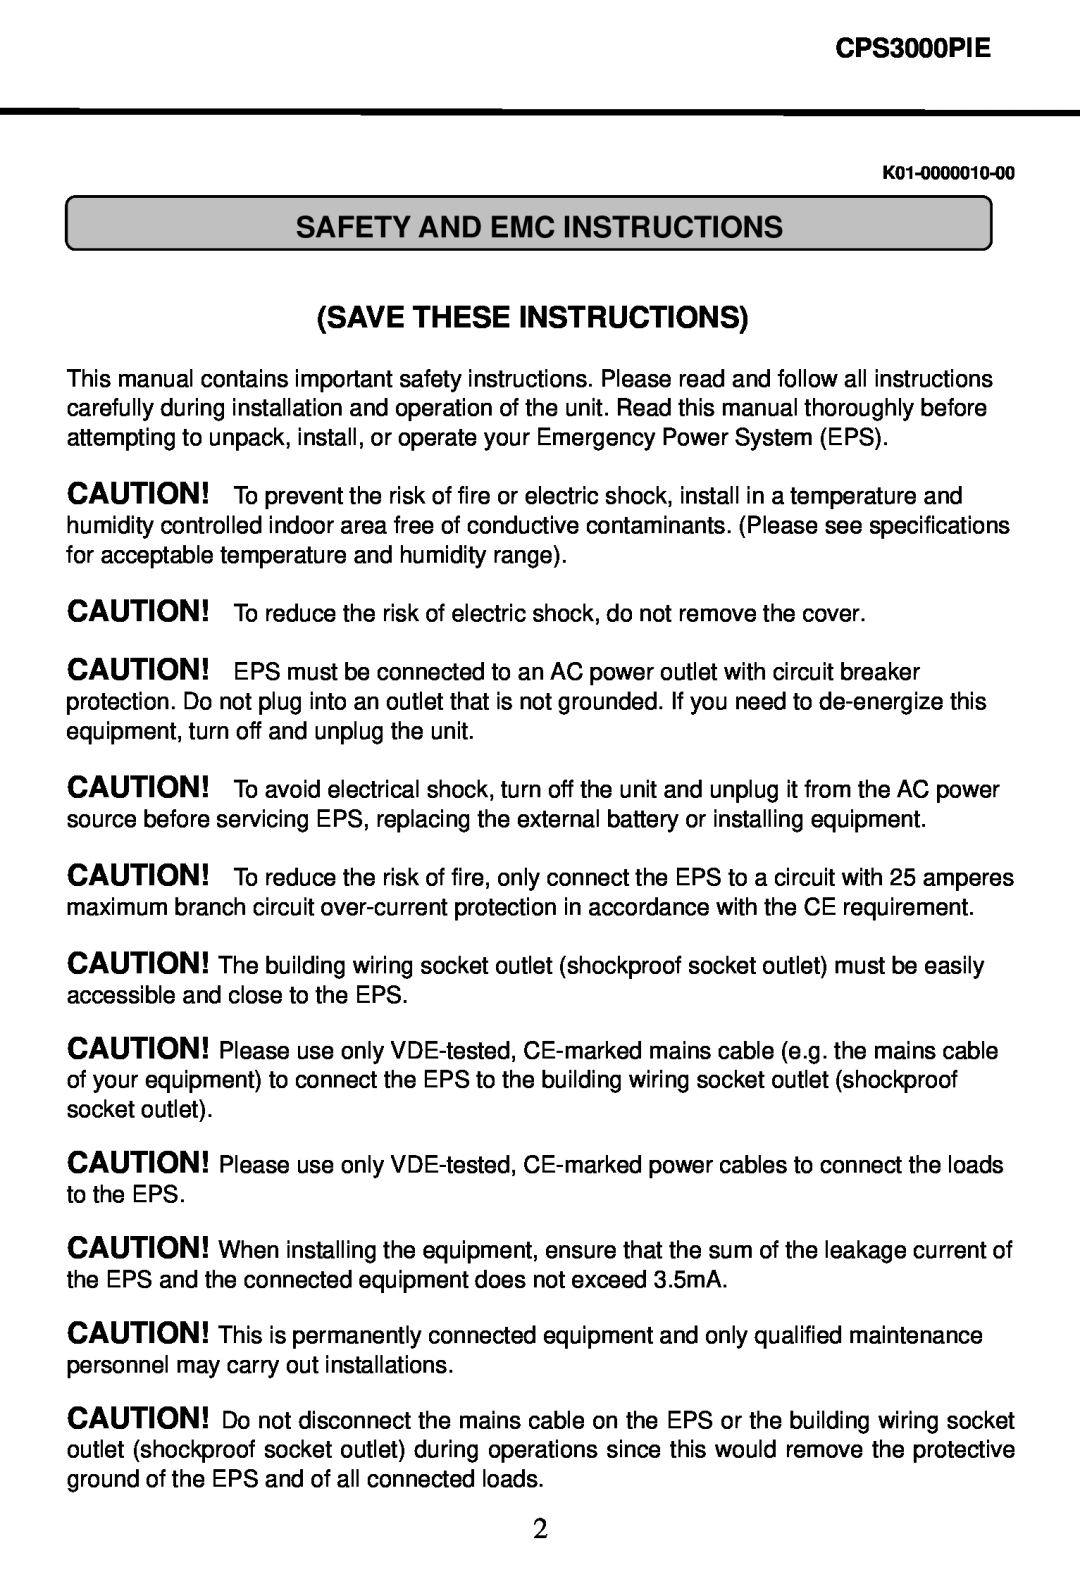 CyberPower Systems CPS3000PIE user manual Safety And Emc Instructions Save These Instructions, K01-0000010-00 